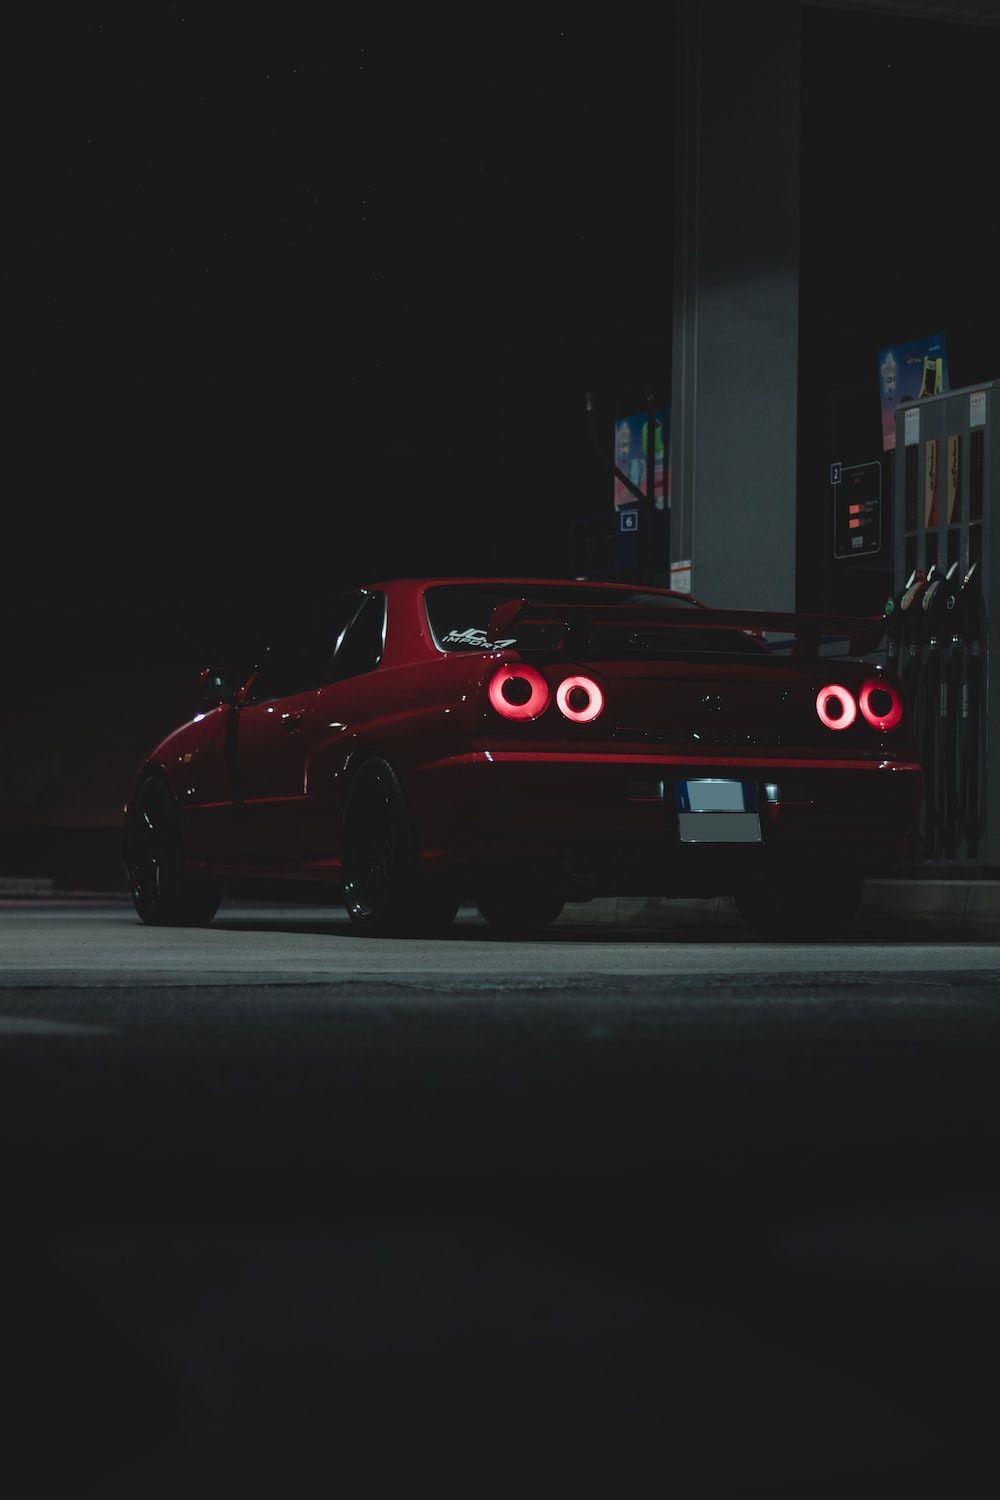 Red sports car at the gas station - Nissan Skyline